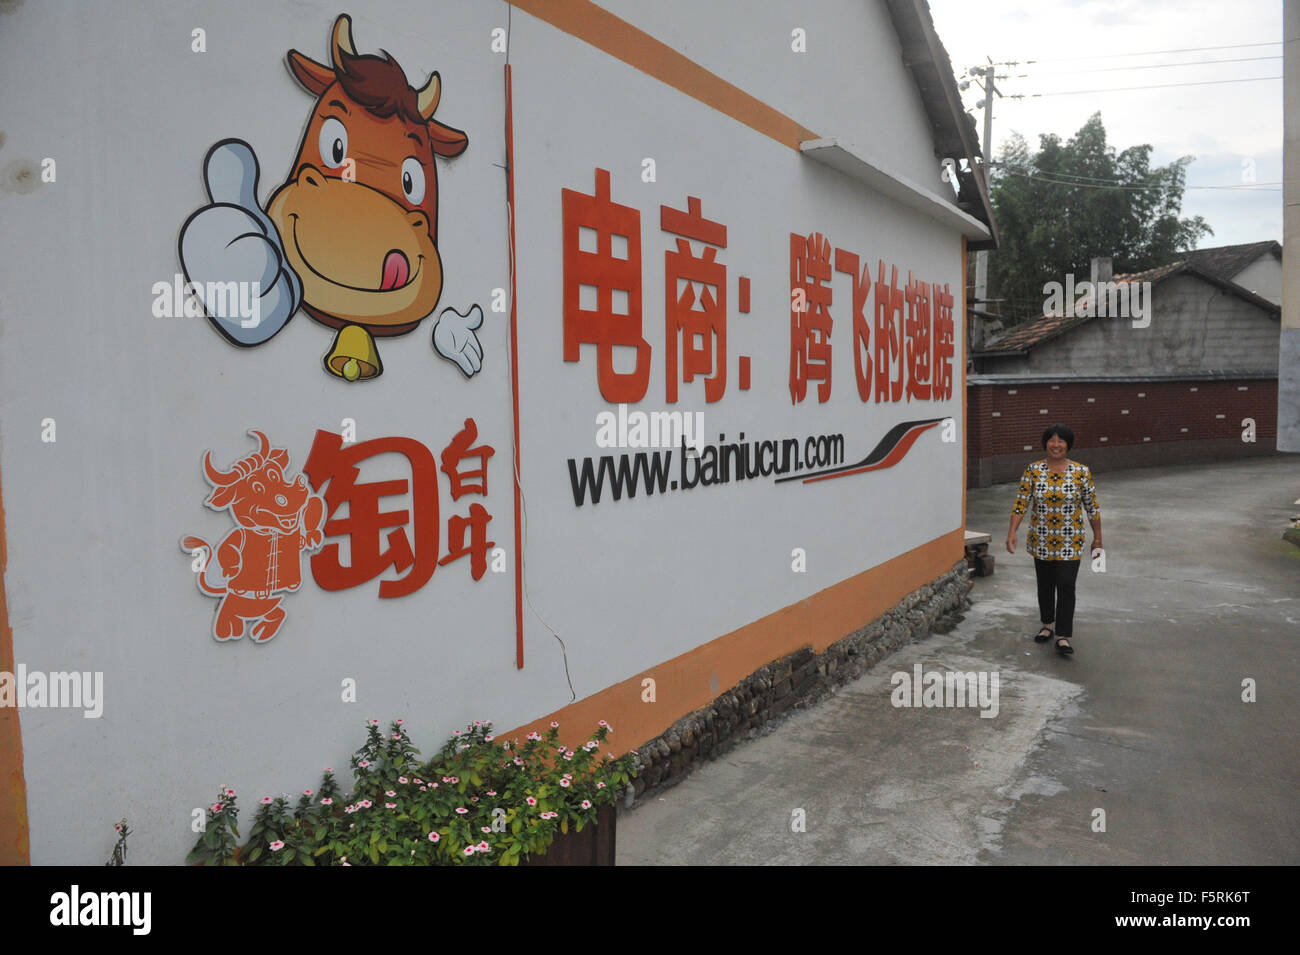 Hangzhou, Zhejiang, CHN. 7th Nov, 2015. Hangzhou, CHINA - November 7 2015: (EDITORIAL USE ONLY. CHINA OUT) Bainiu Village is known as Taobao village. Their e-commercial sales volume in 2015 is over 0.3 biilion. © SIPA Asia/ZUMA Wire/Alamy Live News Stock Photo